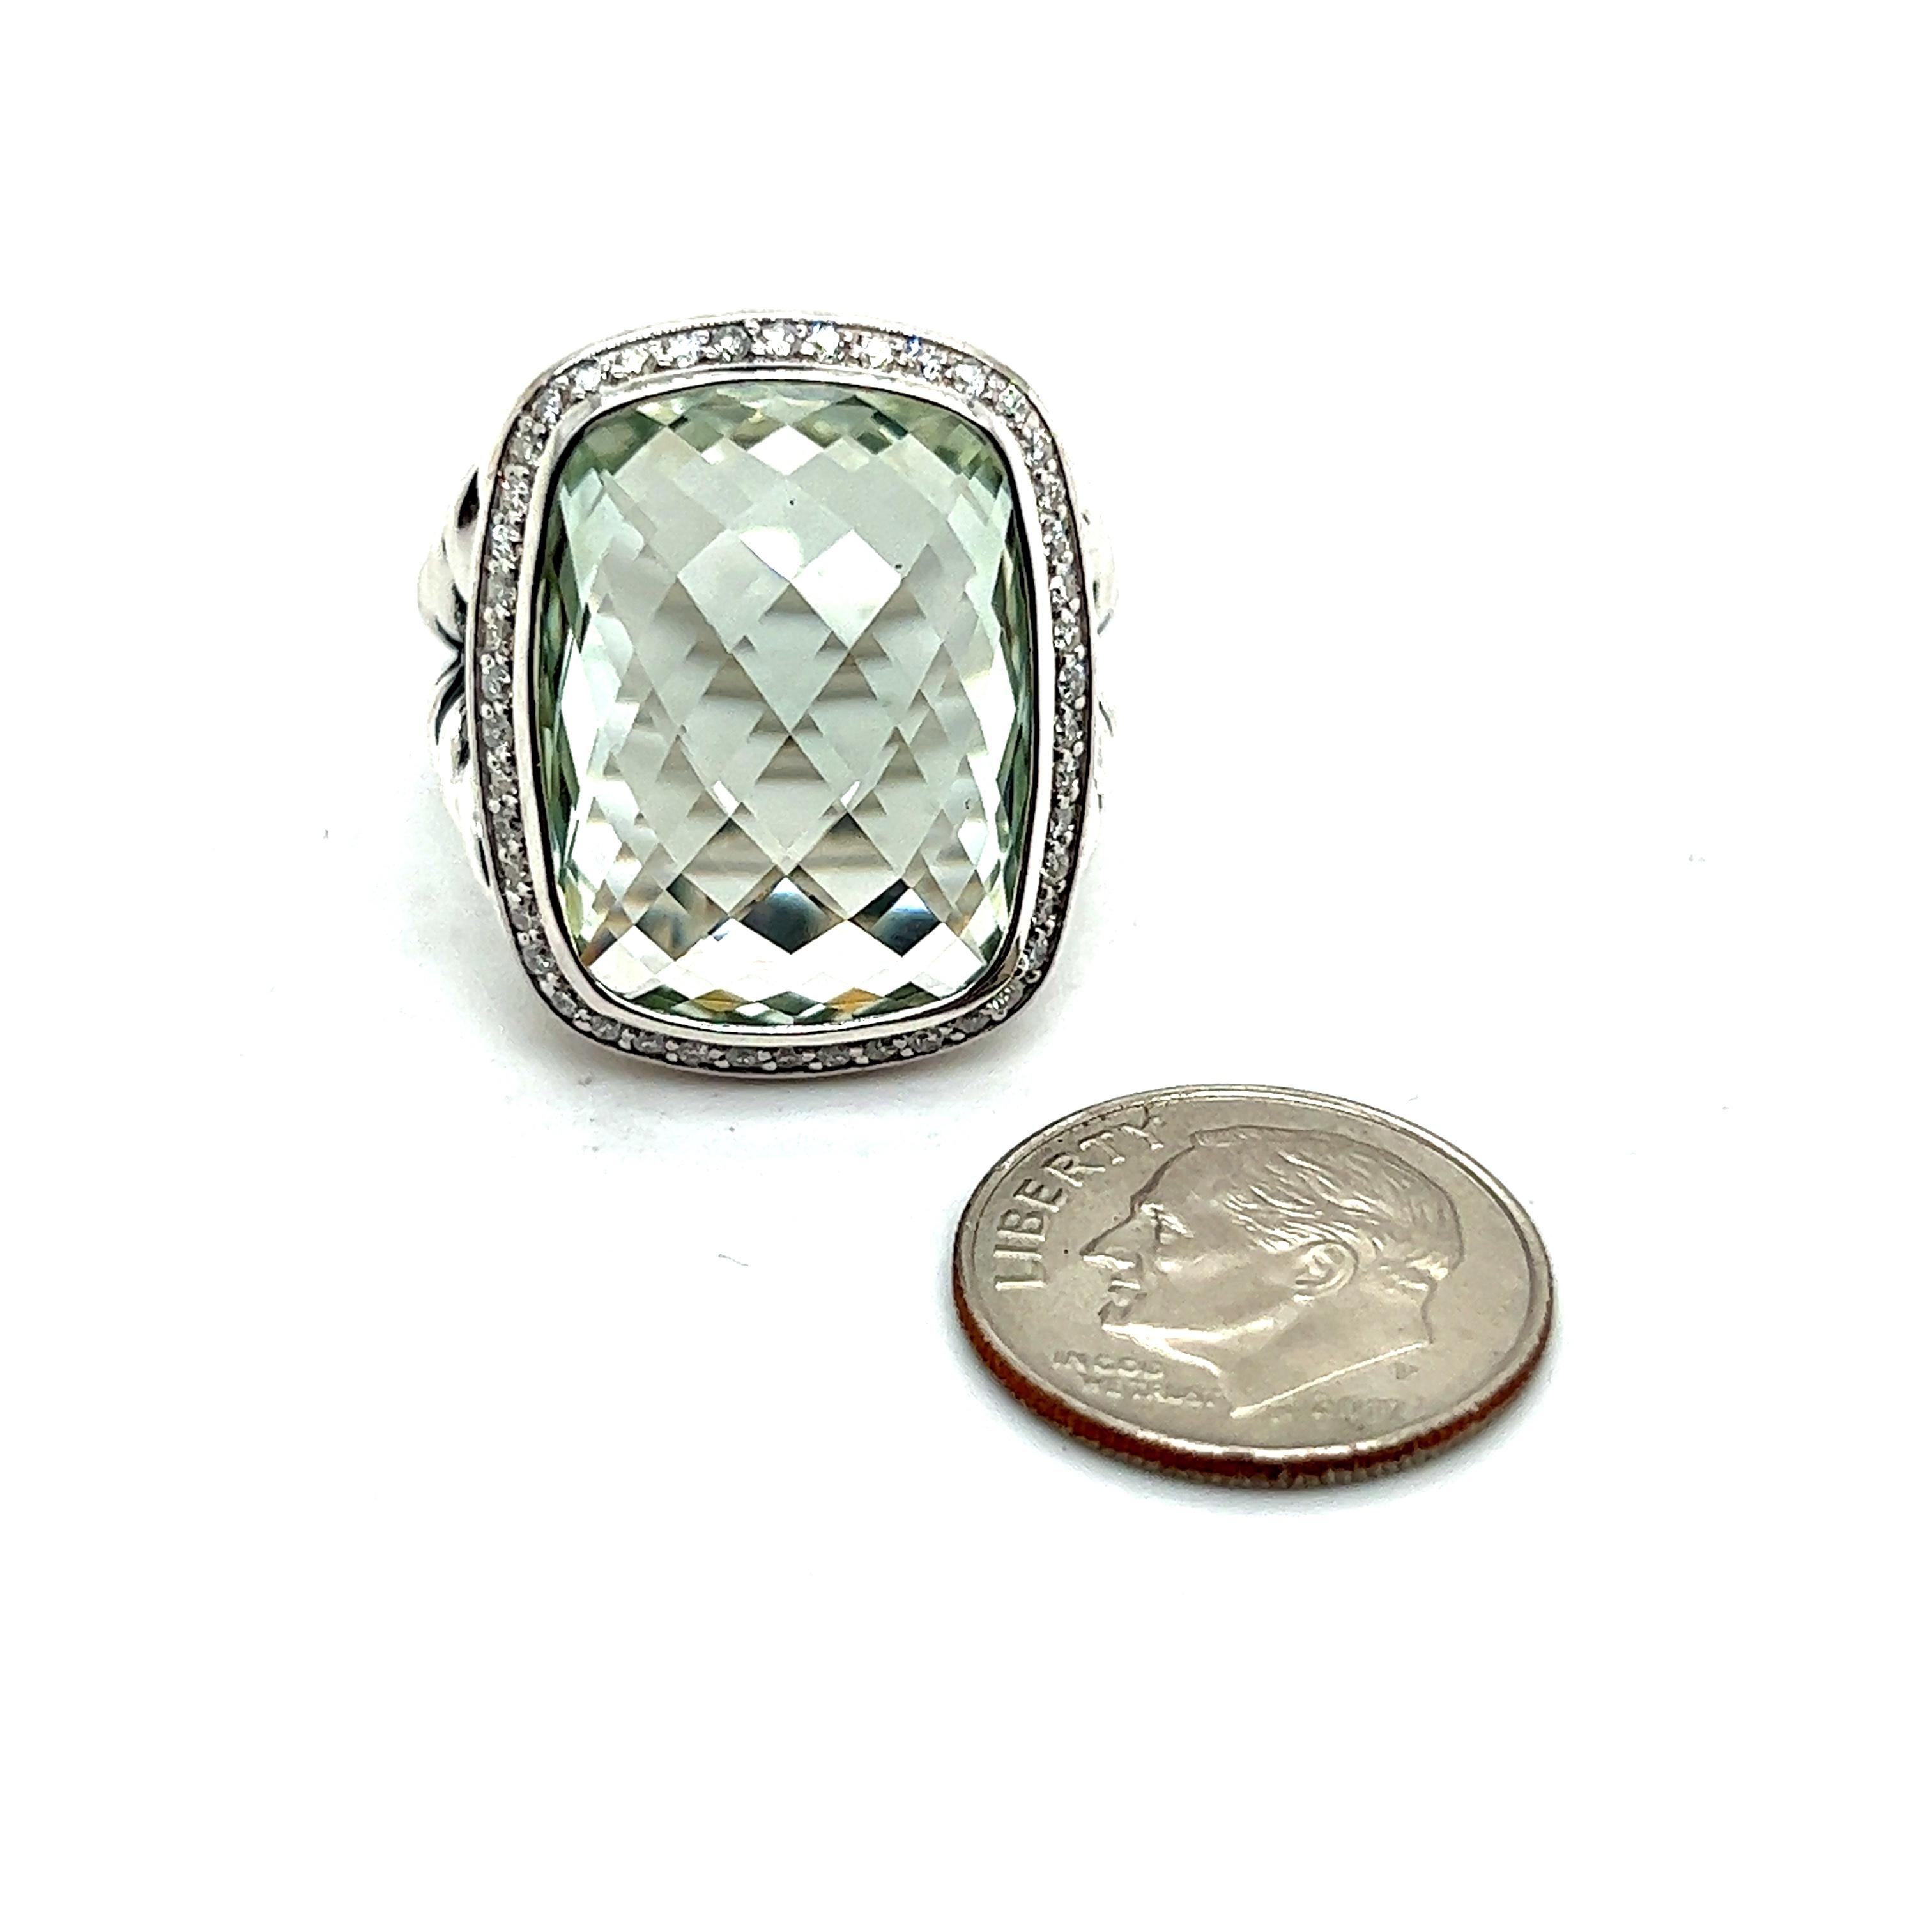 David Yurman Authentic Estate Diamond Wheaton Prasiolite Ring Size 8 Silver DY205

$1599

This elegant Authentic David Yurman ring is made of sterling silver.

TRUSTED SELLER SINCE 2002

PLEASE SEE OUR HUNDREDS OF POSITIVE FEEDBACKS FROM OUR